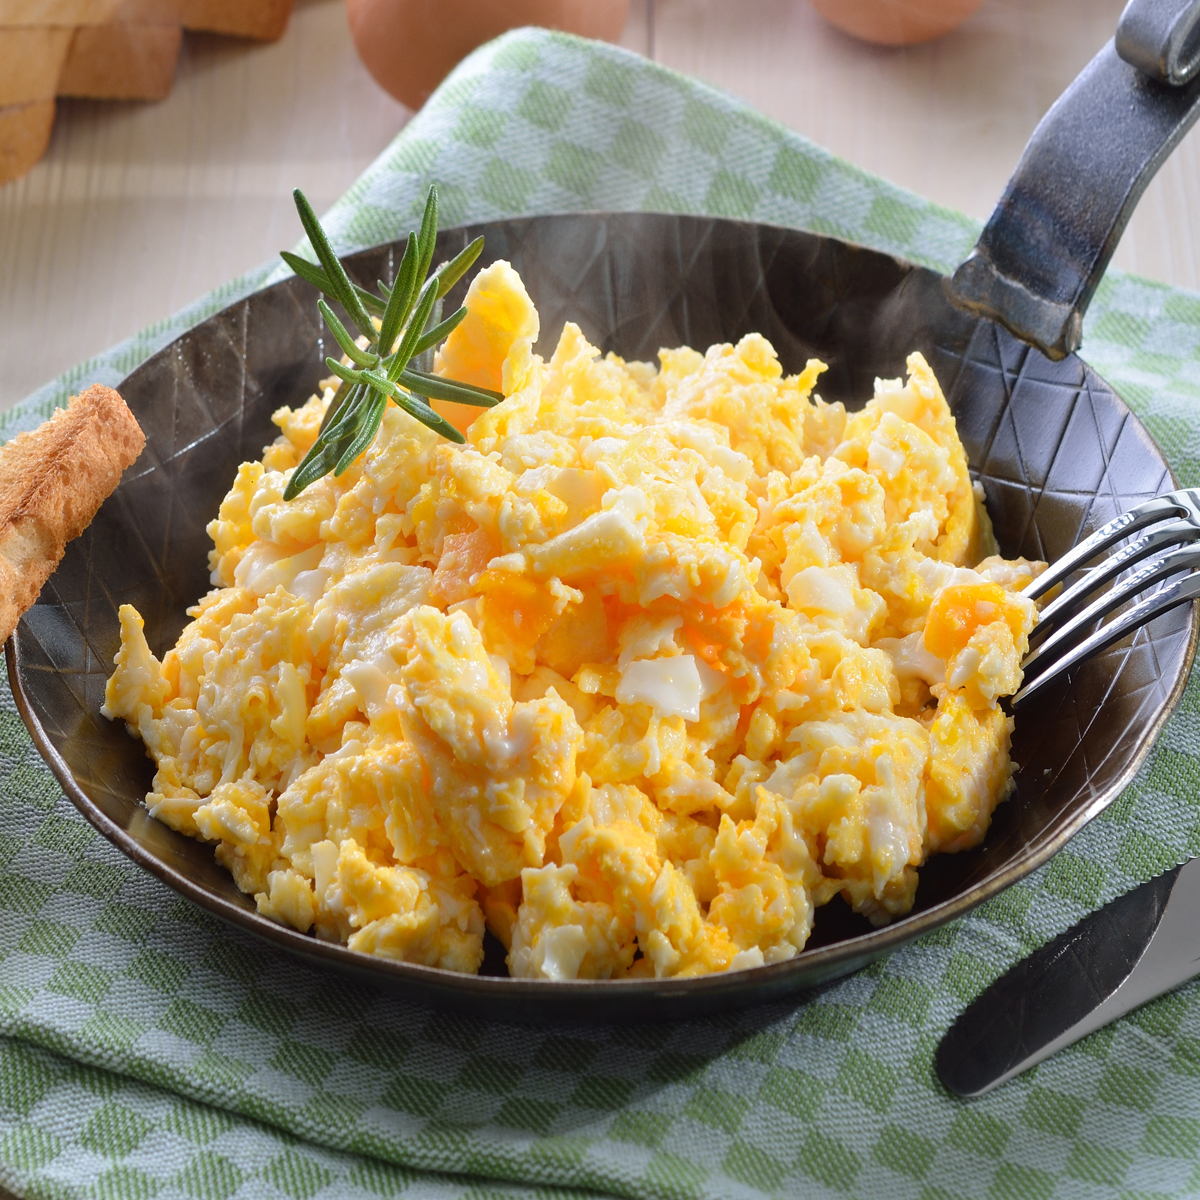 Easy Scrambled Eggs Recipe! 5 Minutes To Perfection! - Living On A Dime